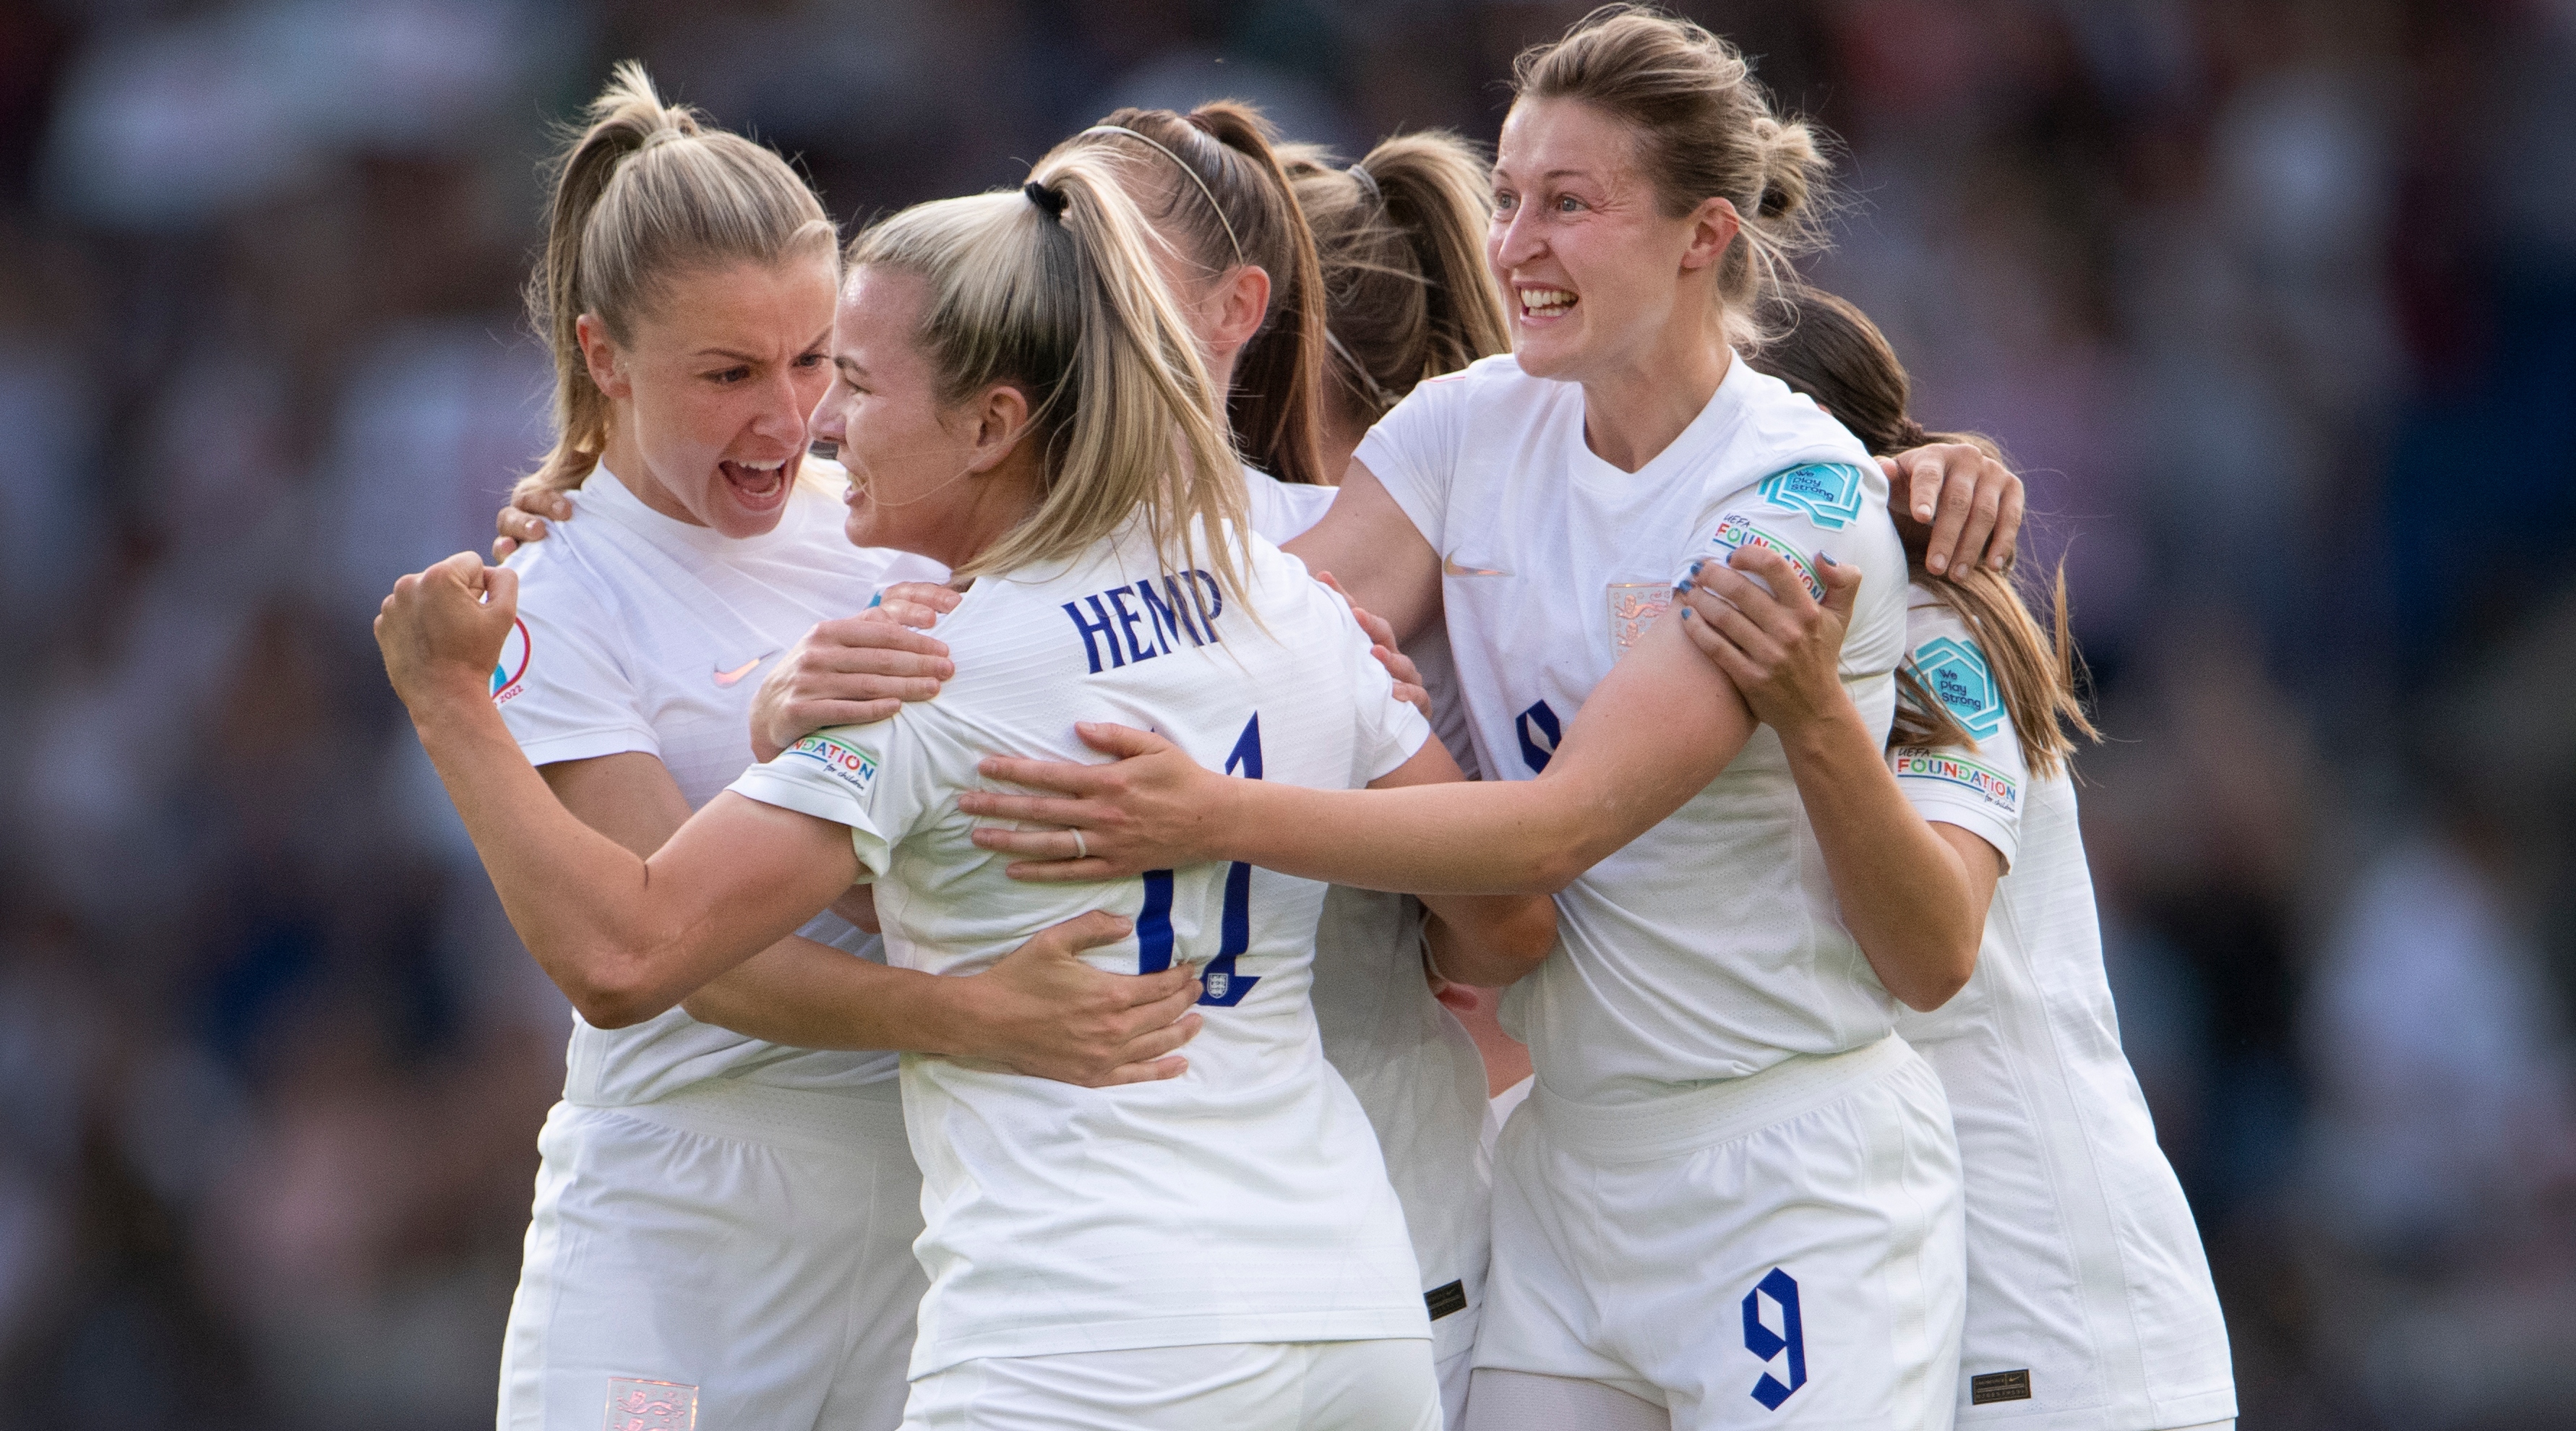 BRIGHTON, ENGLAND - JULY 11: Lauren Hemp of England celebrates her goal with Leah Williamson, Ellen White and team mates during the UEFA Women's Euro England 2022 group A match between England and Norway at Brighton & Hove Community Stadium on July 11, 2022 in Brighton, United Kingdom.